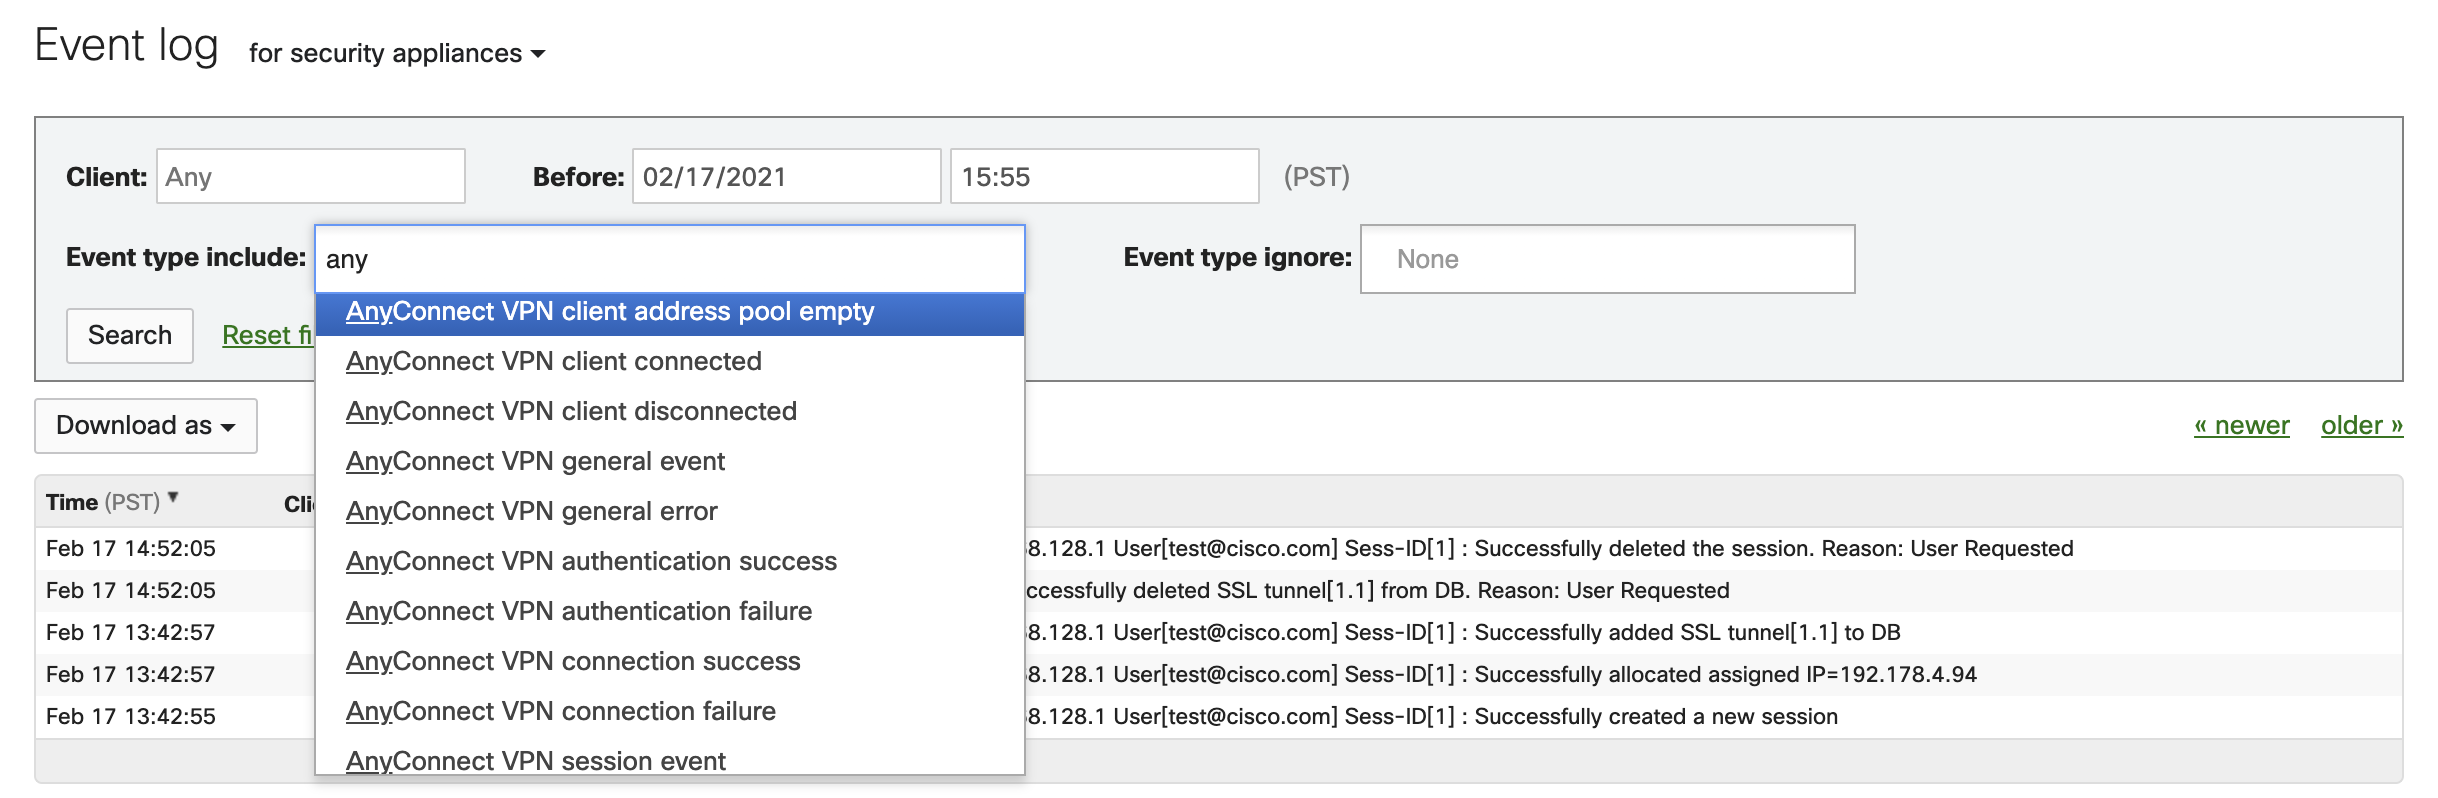 Event Log table and "Event type include" dropdown filter menu. 